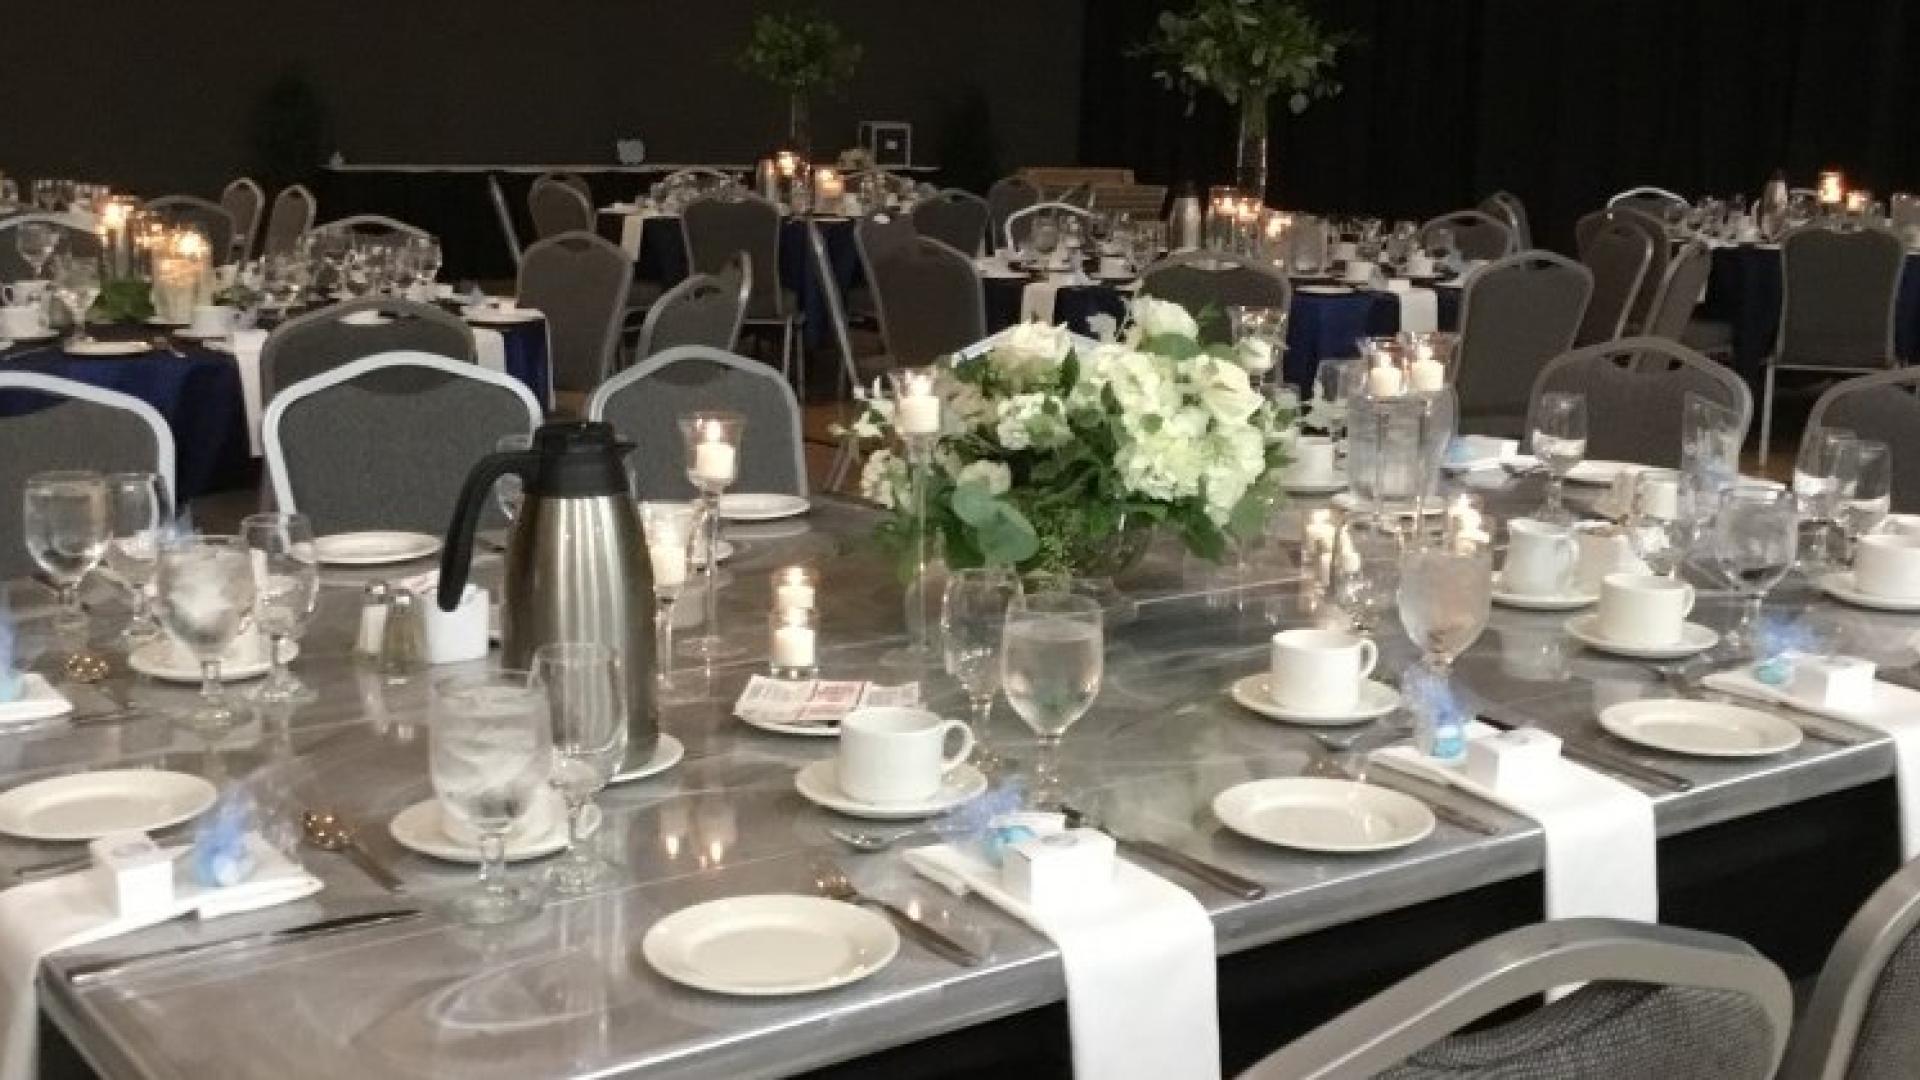 Tables and chairs set for a formal dinner, with flowers, candles, and cloth napkins